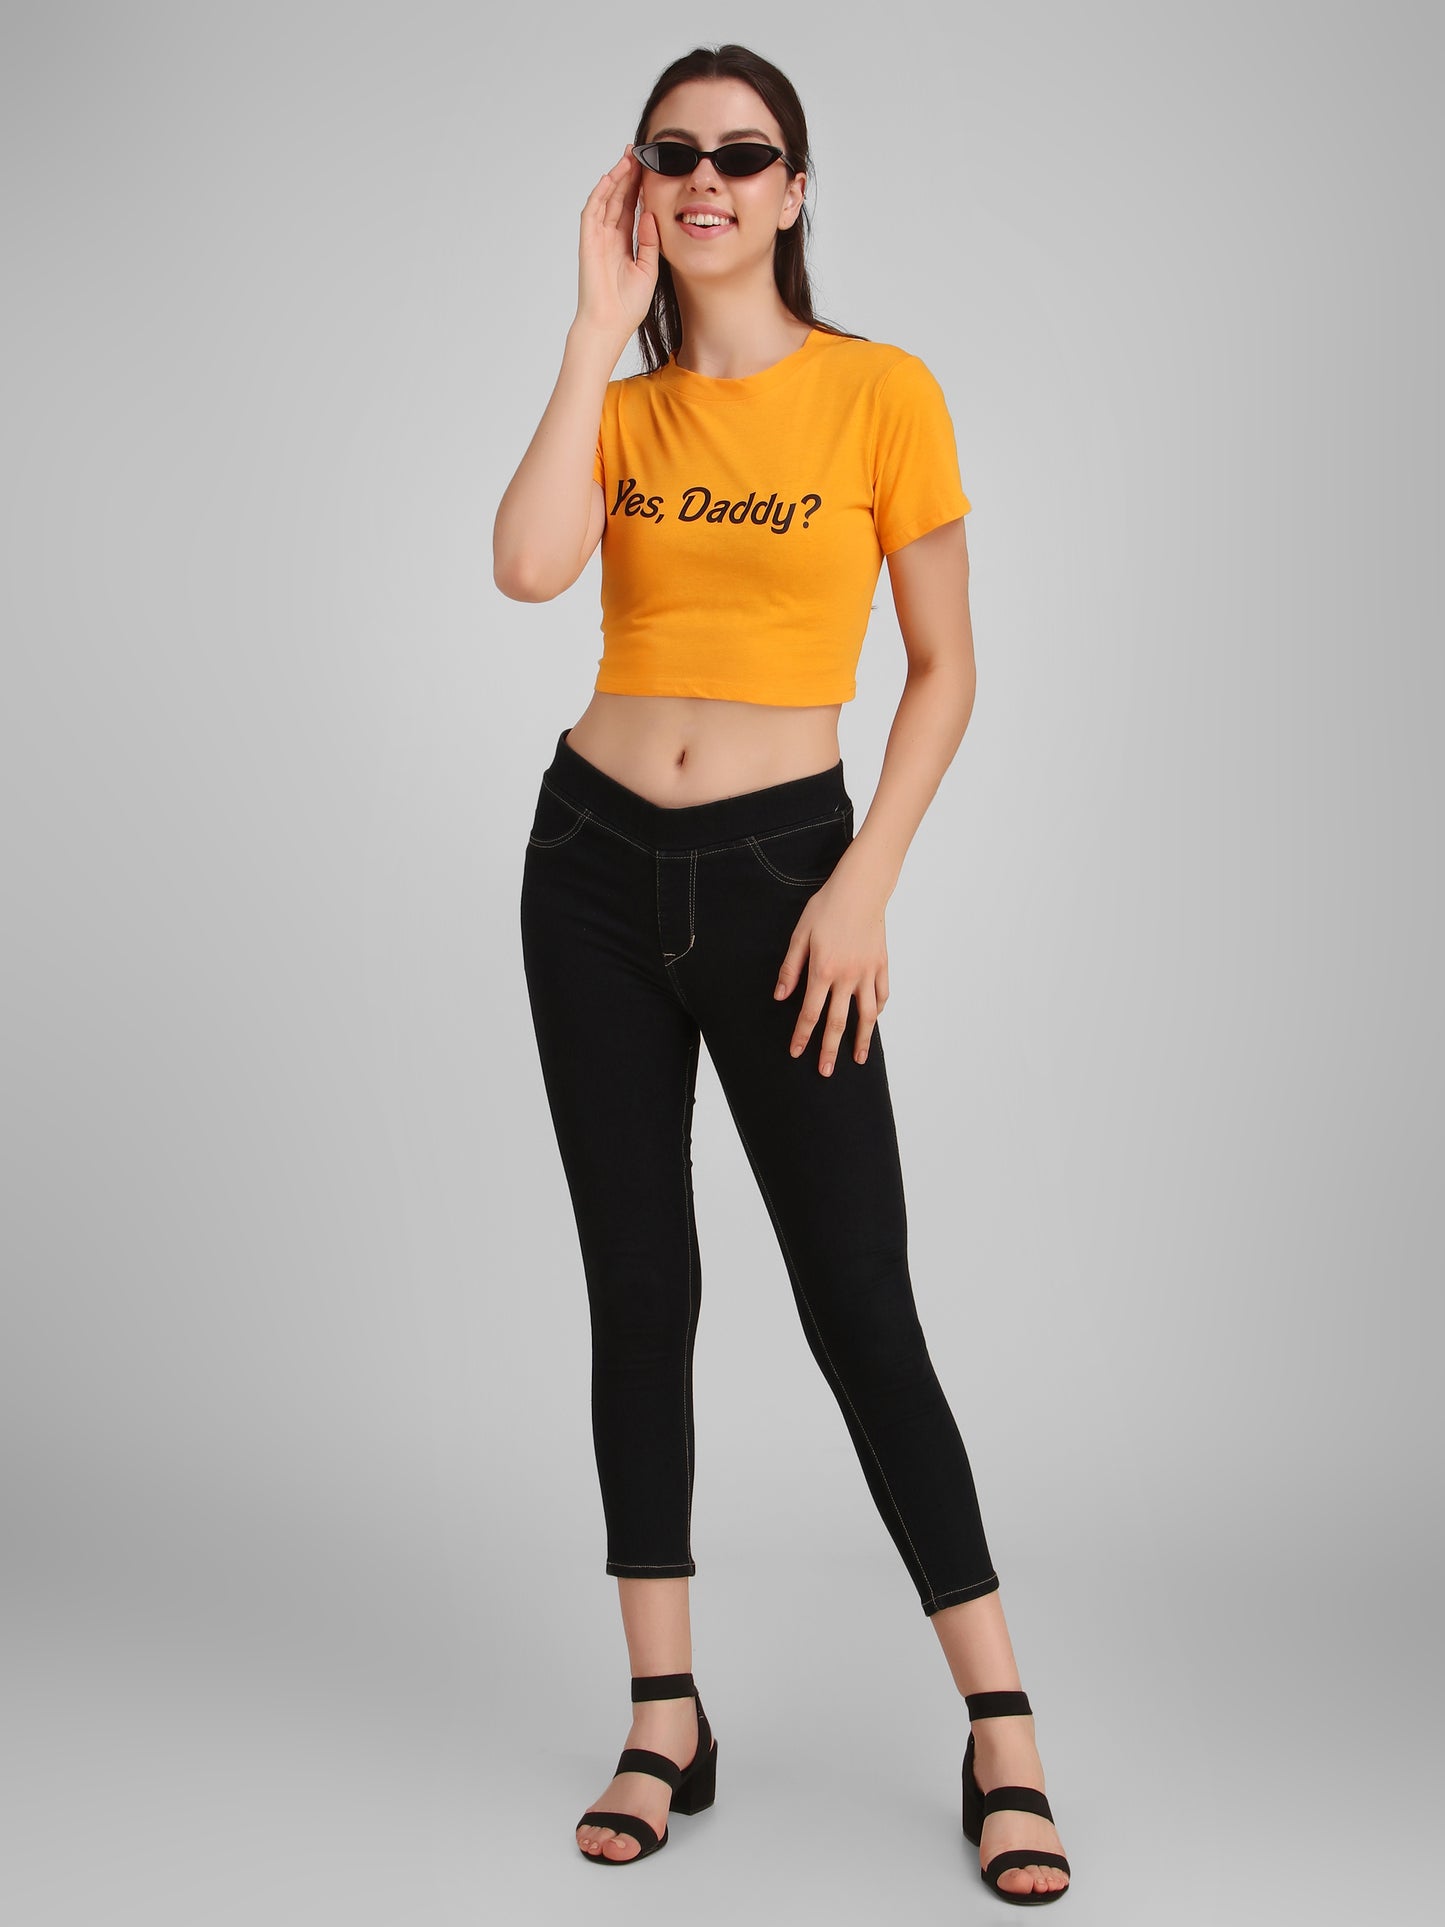 Mustard Dog & Mustard Yes Daddy Print Combo(2 Tops) Crop Tops!!